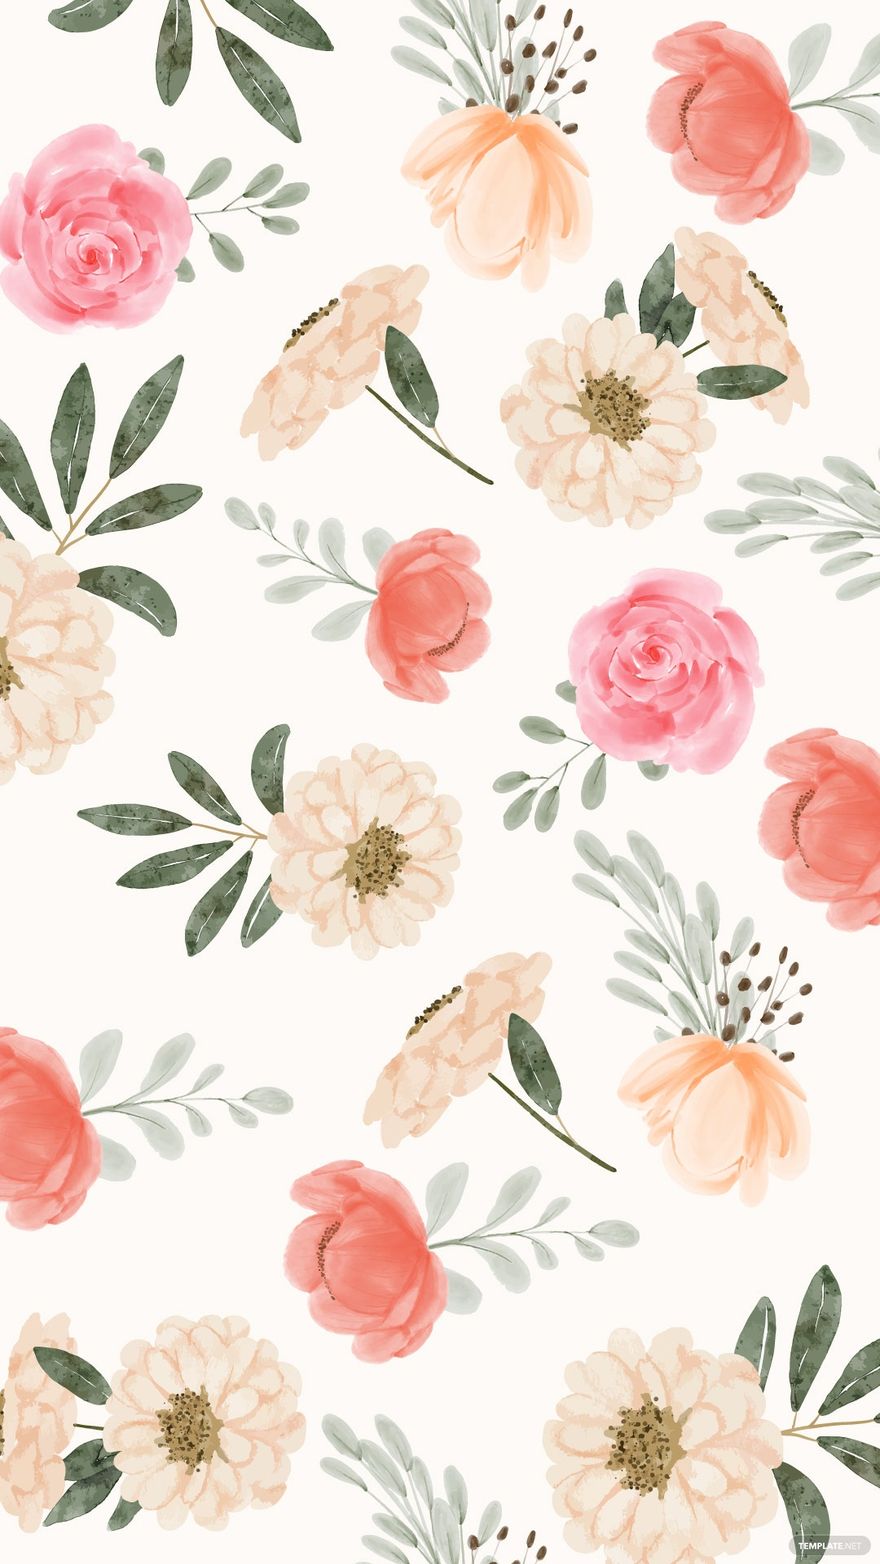 Floral Fabric White Background